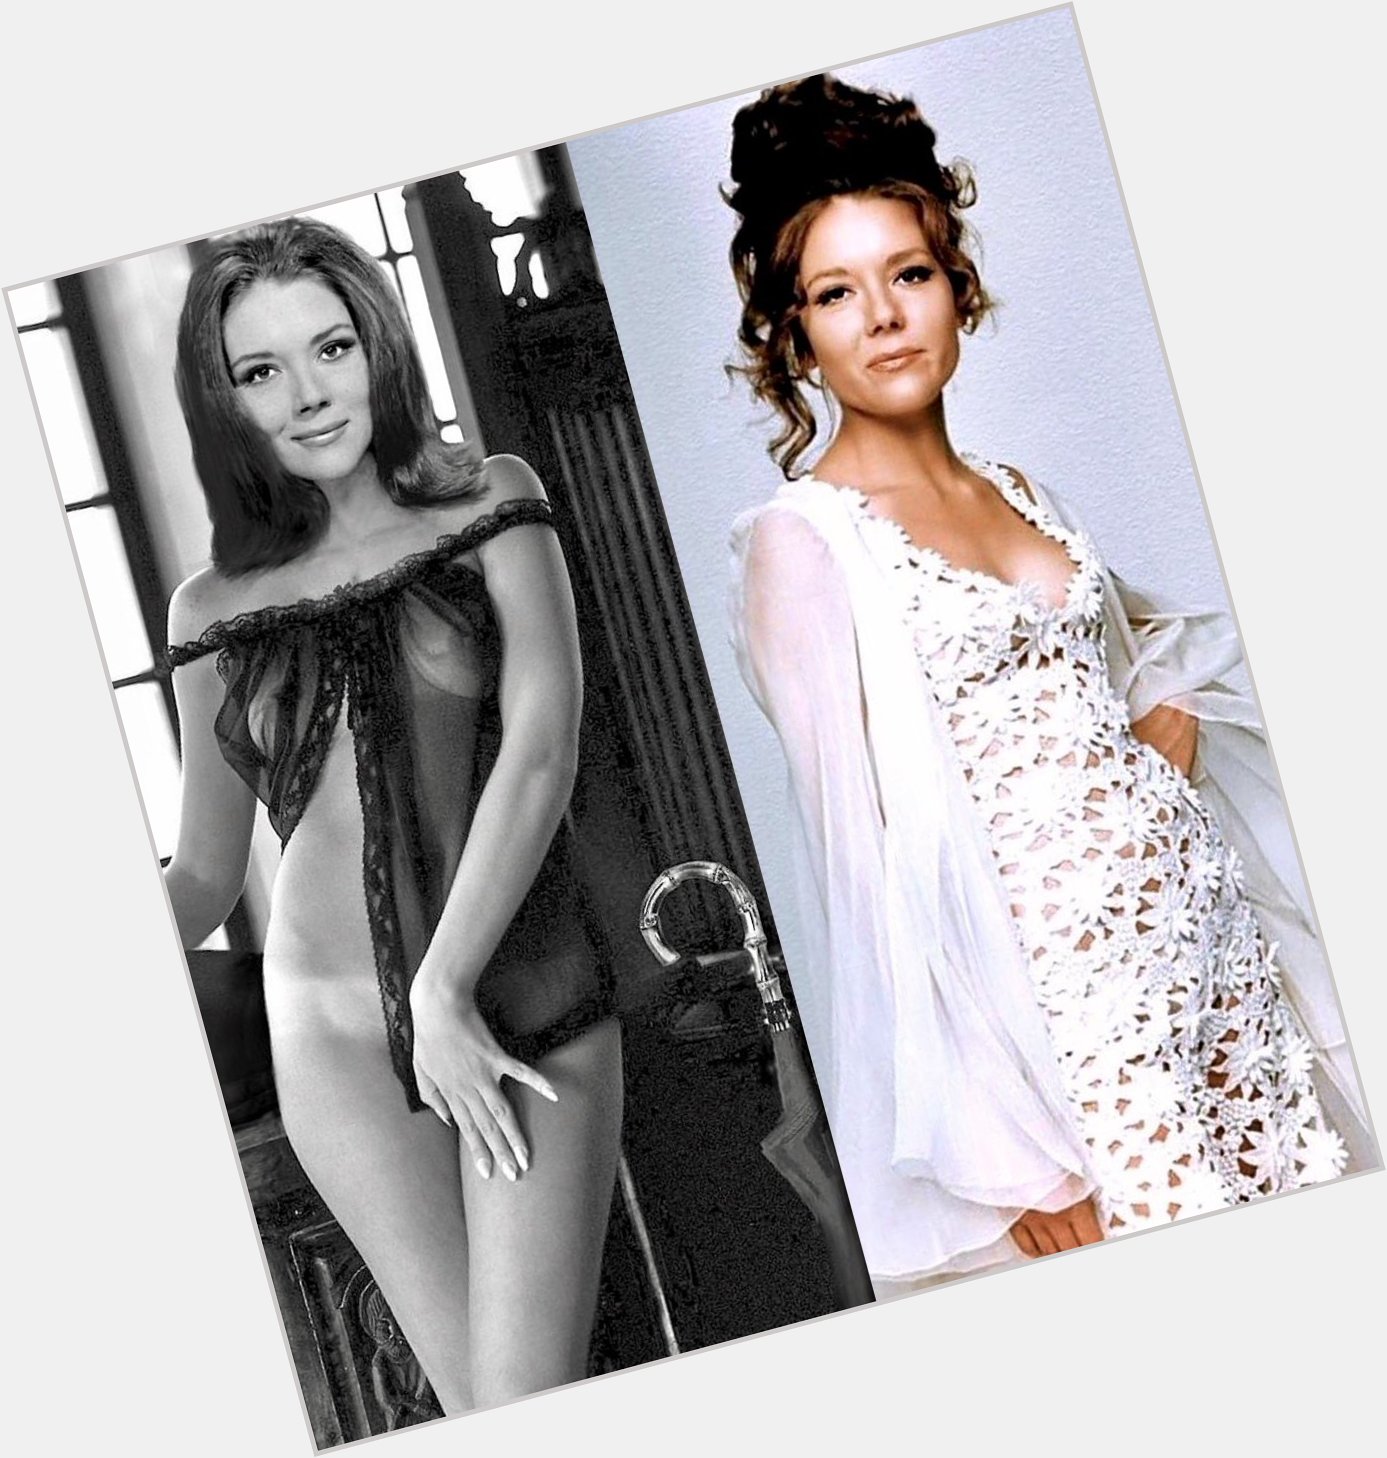 Happy 81th birthday to the lovely actress Diana Rigg...

The best Mrs. Emma Peel ever   